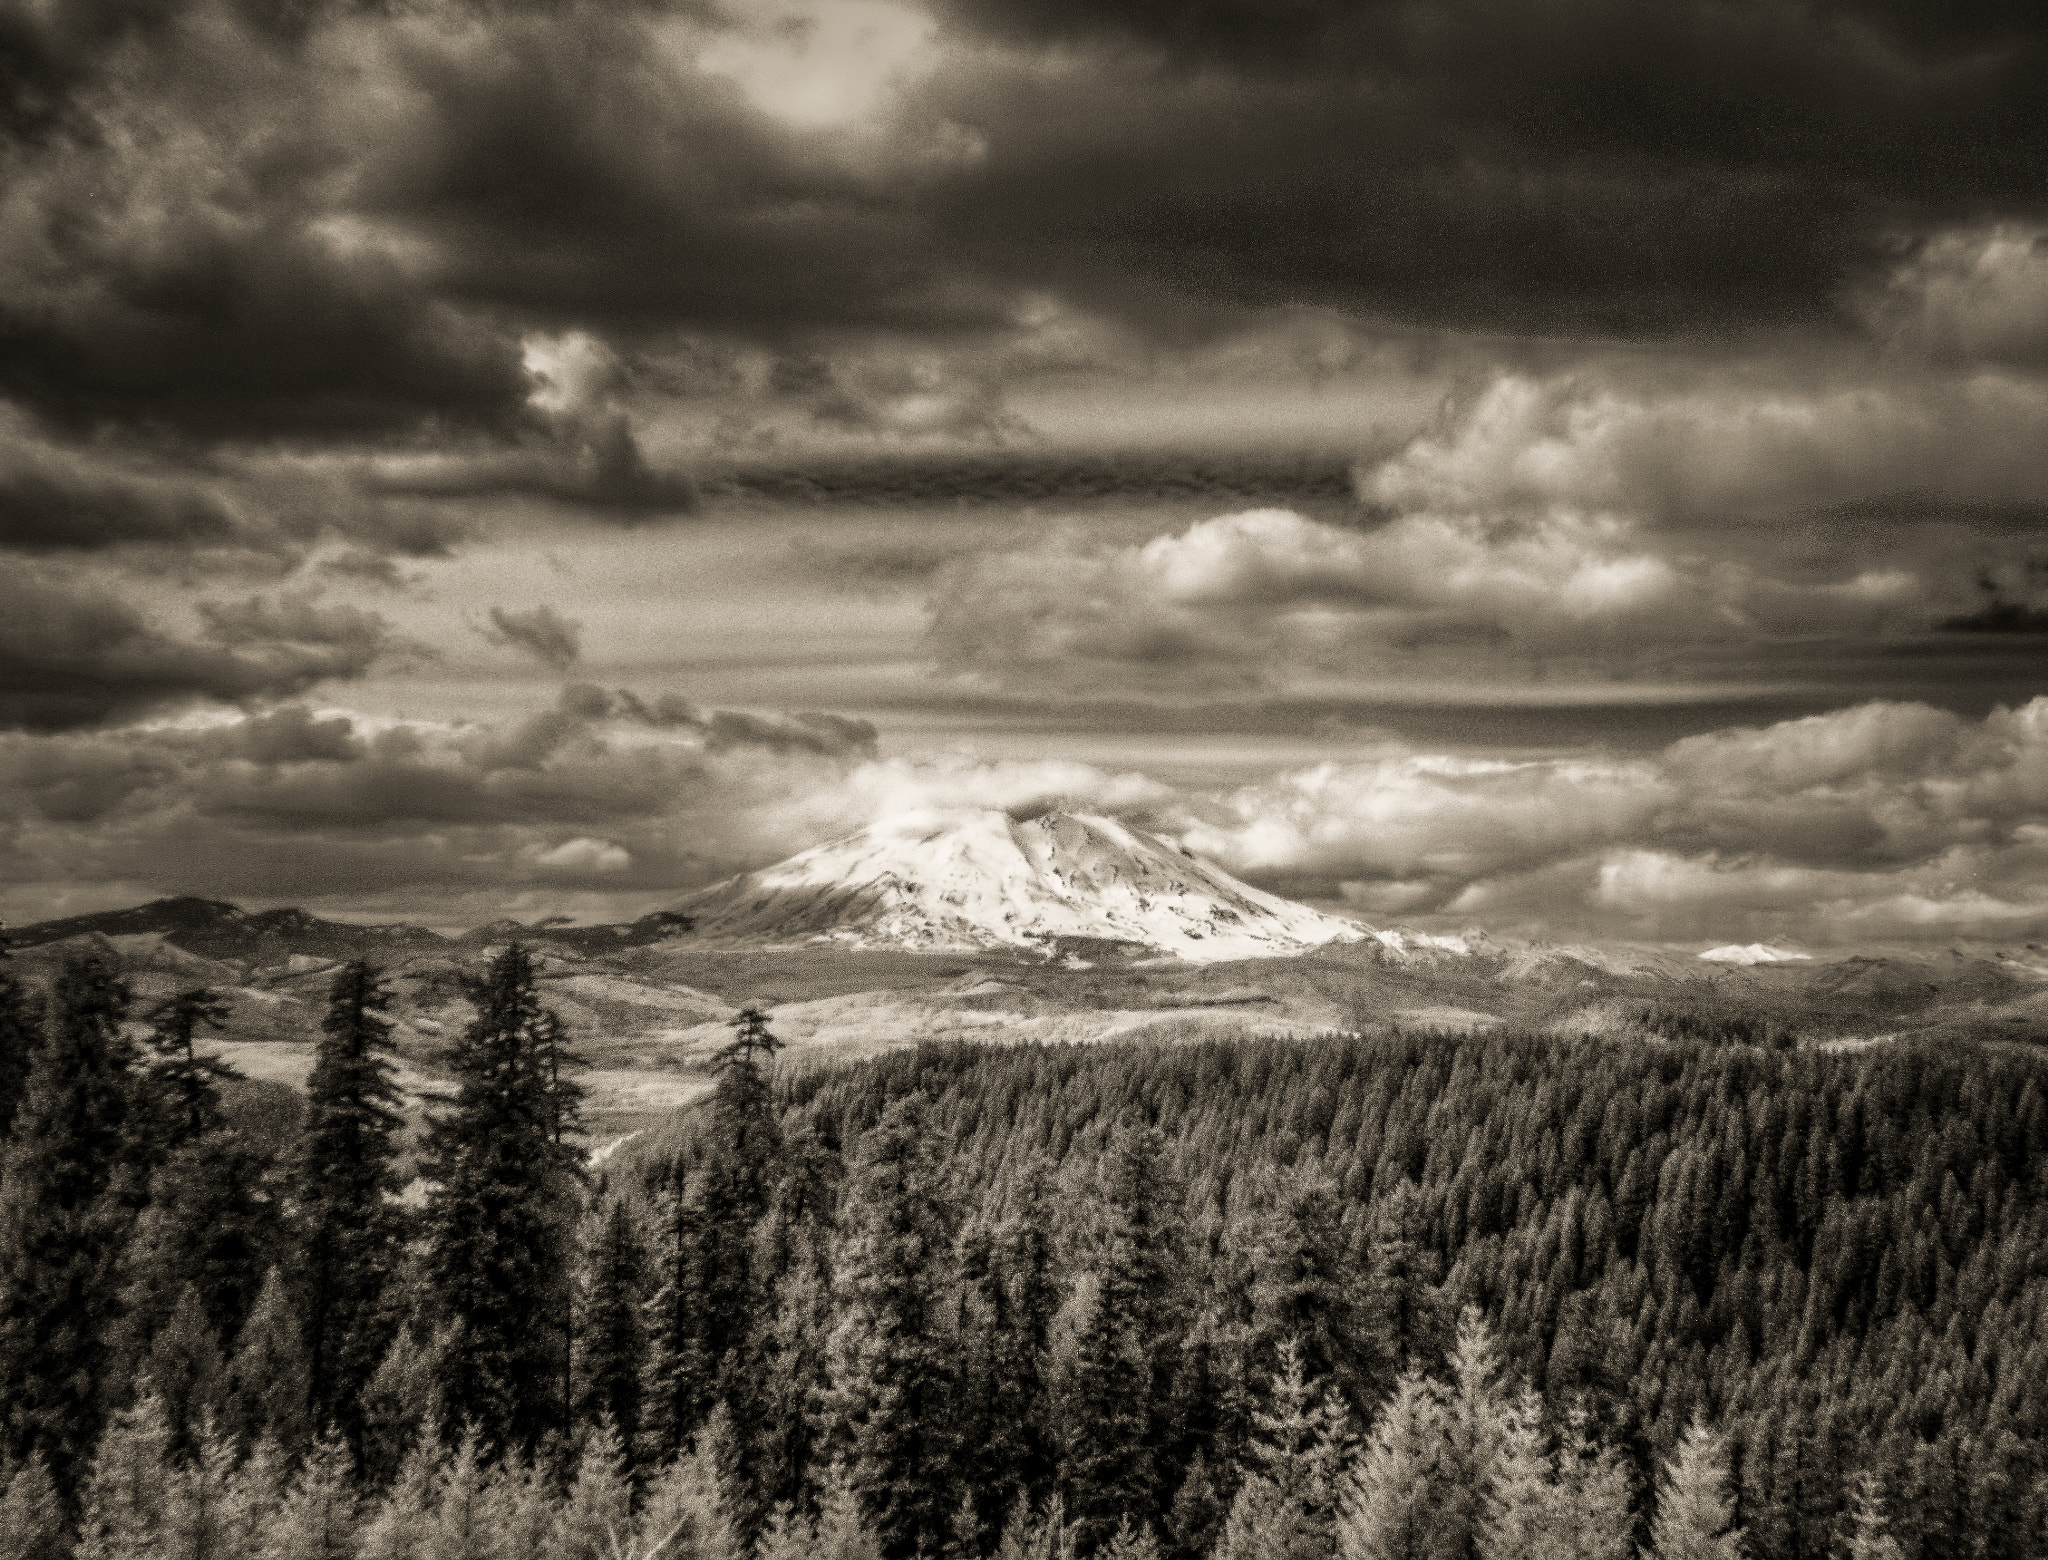 Panasonic DC-ZS70 sample photo. Mt. st. helen's in infrared photography